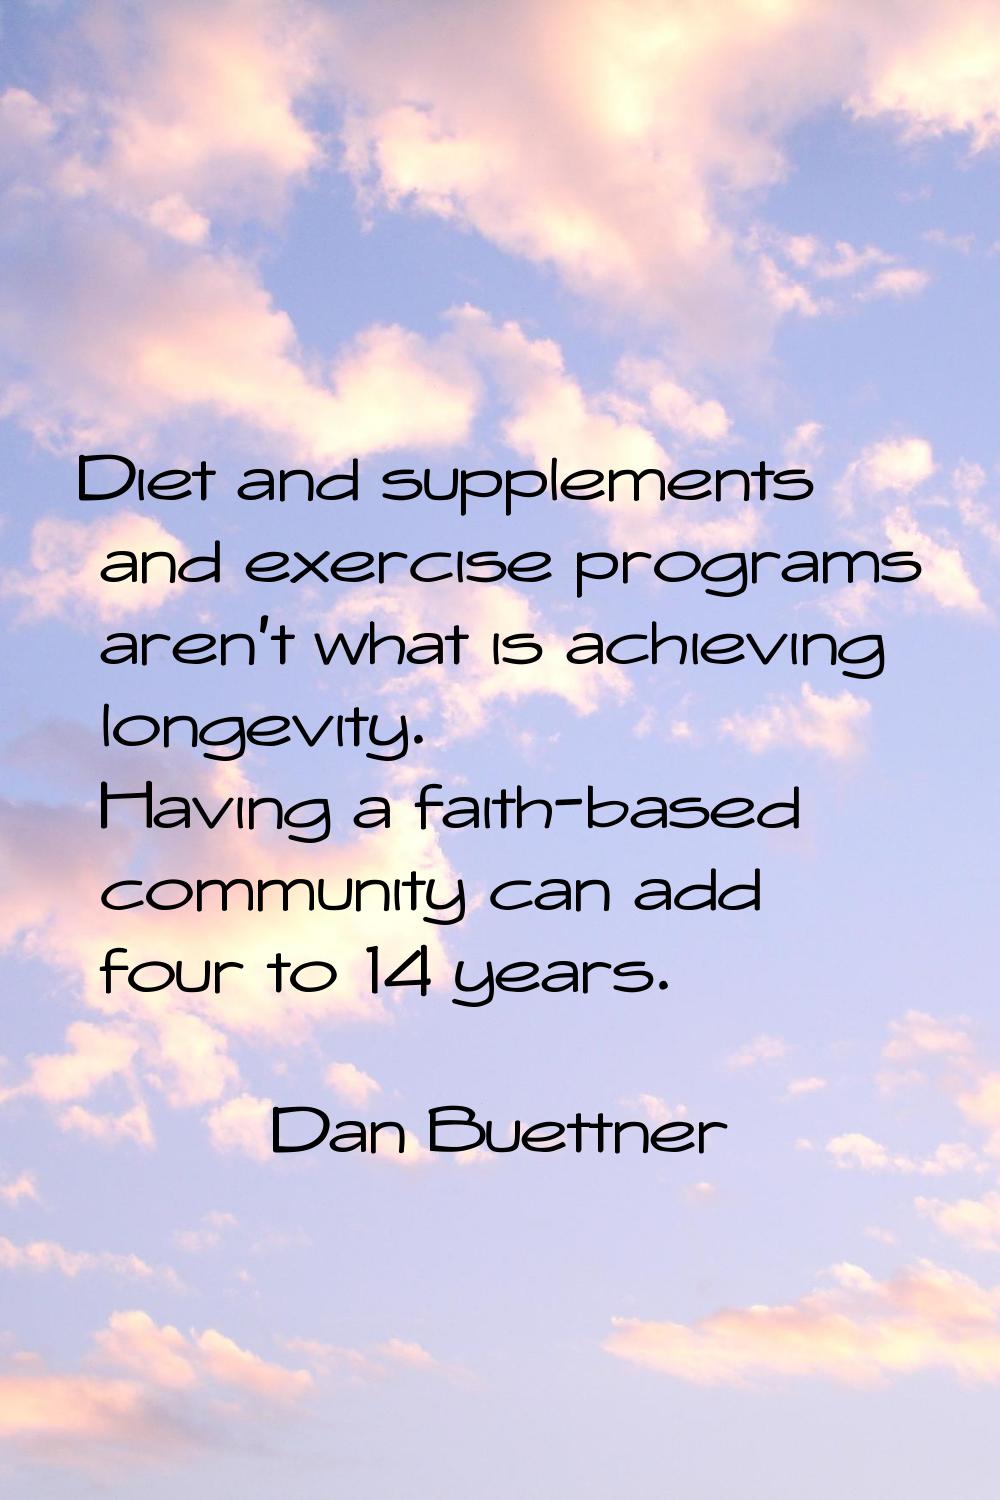 Diet and supplements and exercise programs aren't what is achieving longevity. Having a faith-based